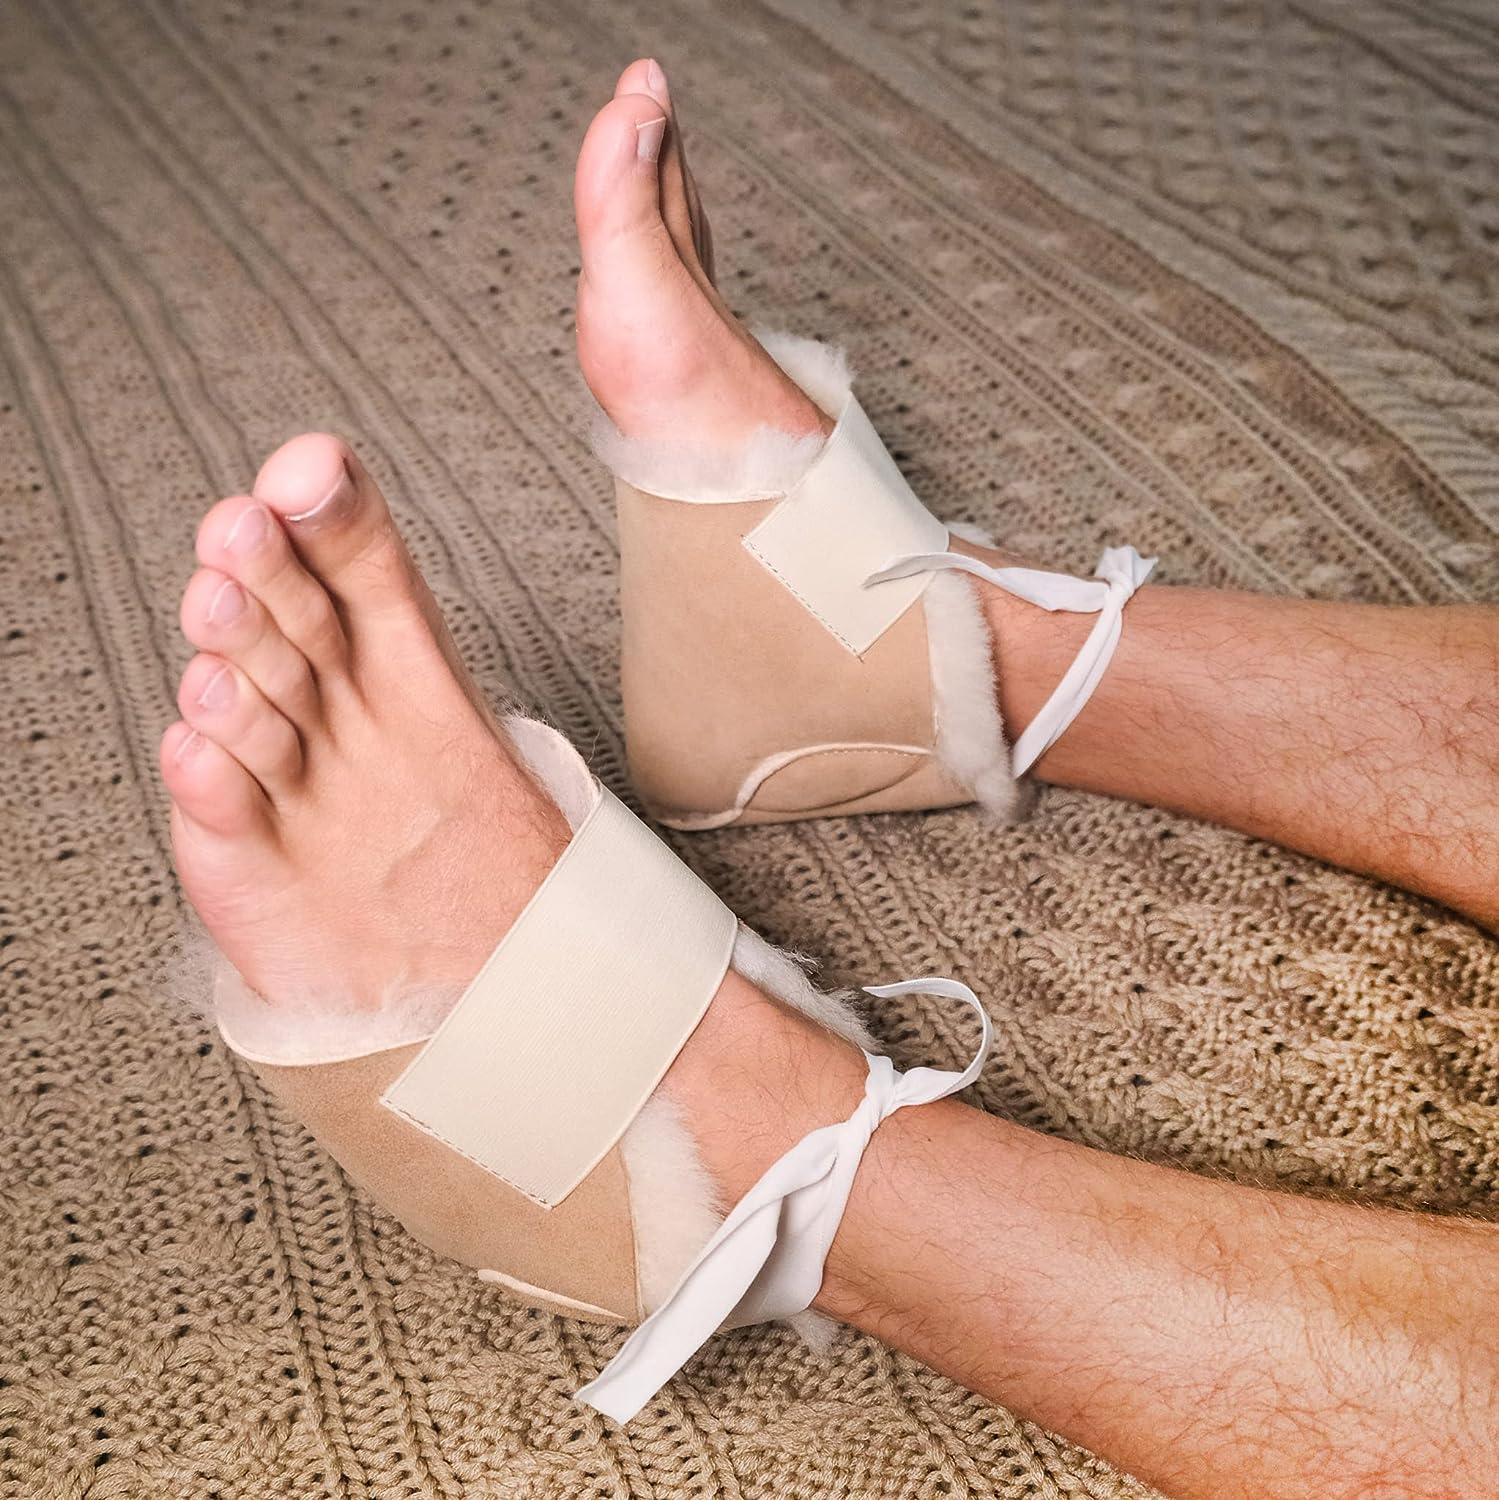 Best Foot Pillows for Pressure Sores and Bed Sores in 2023 | Fanwer